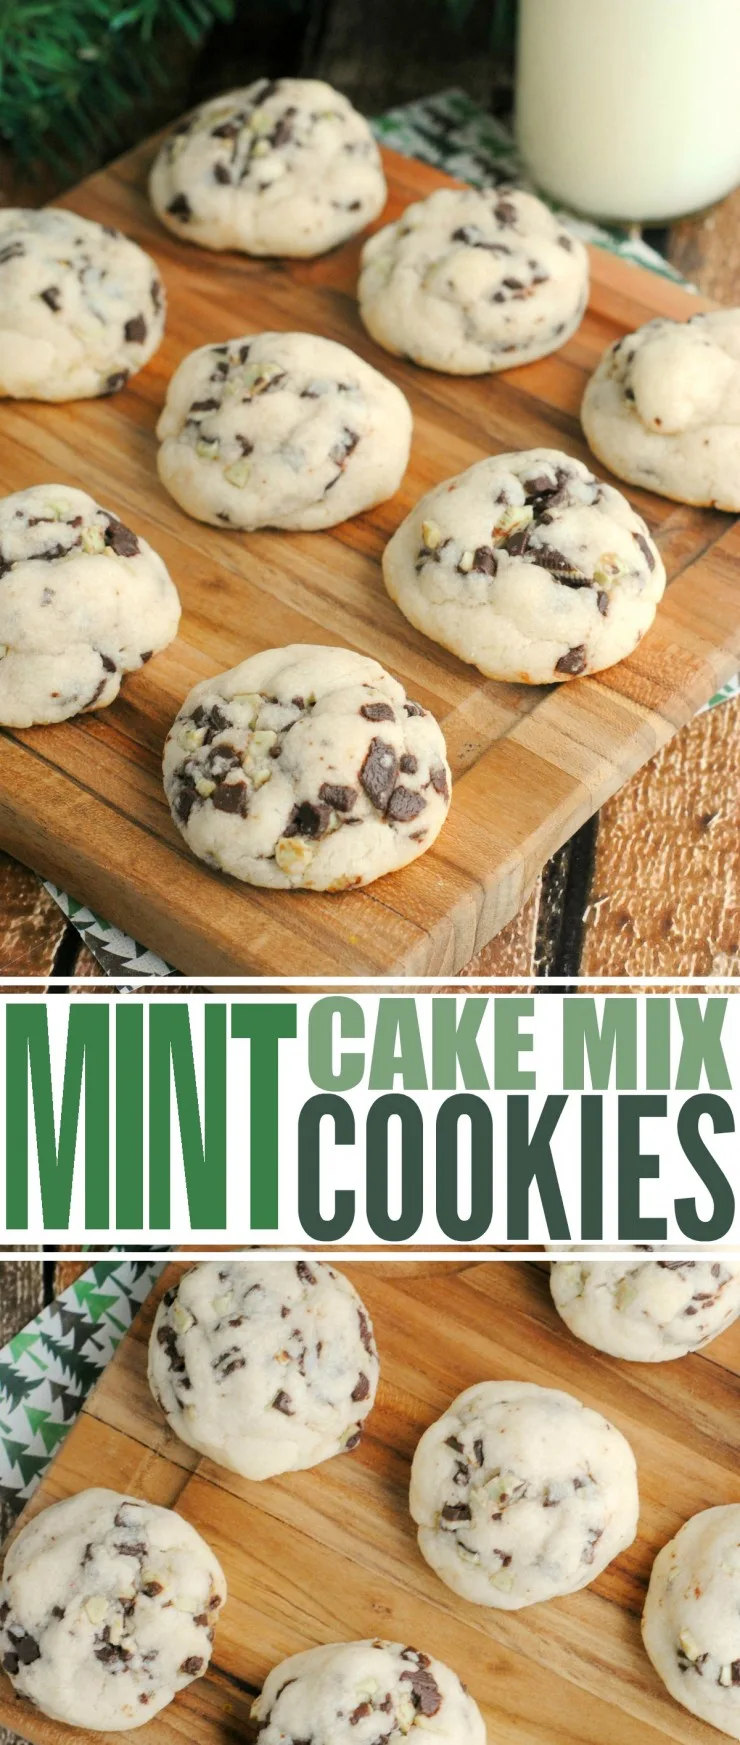 These Mint Cake Mix Cookies are an easy and delicious Christmas cookie made with cake mix and Andes mint baking bits.